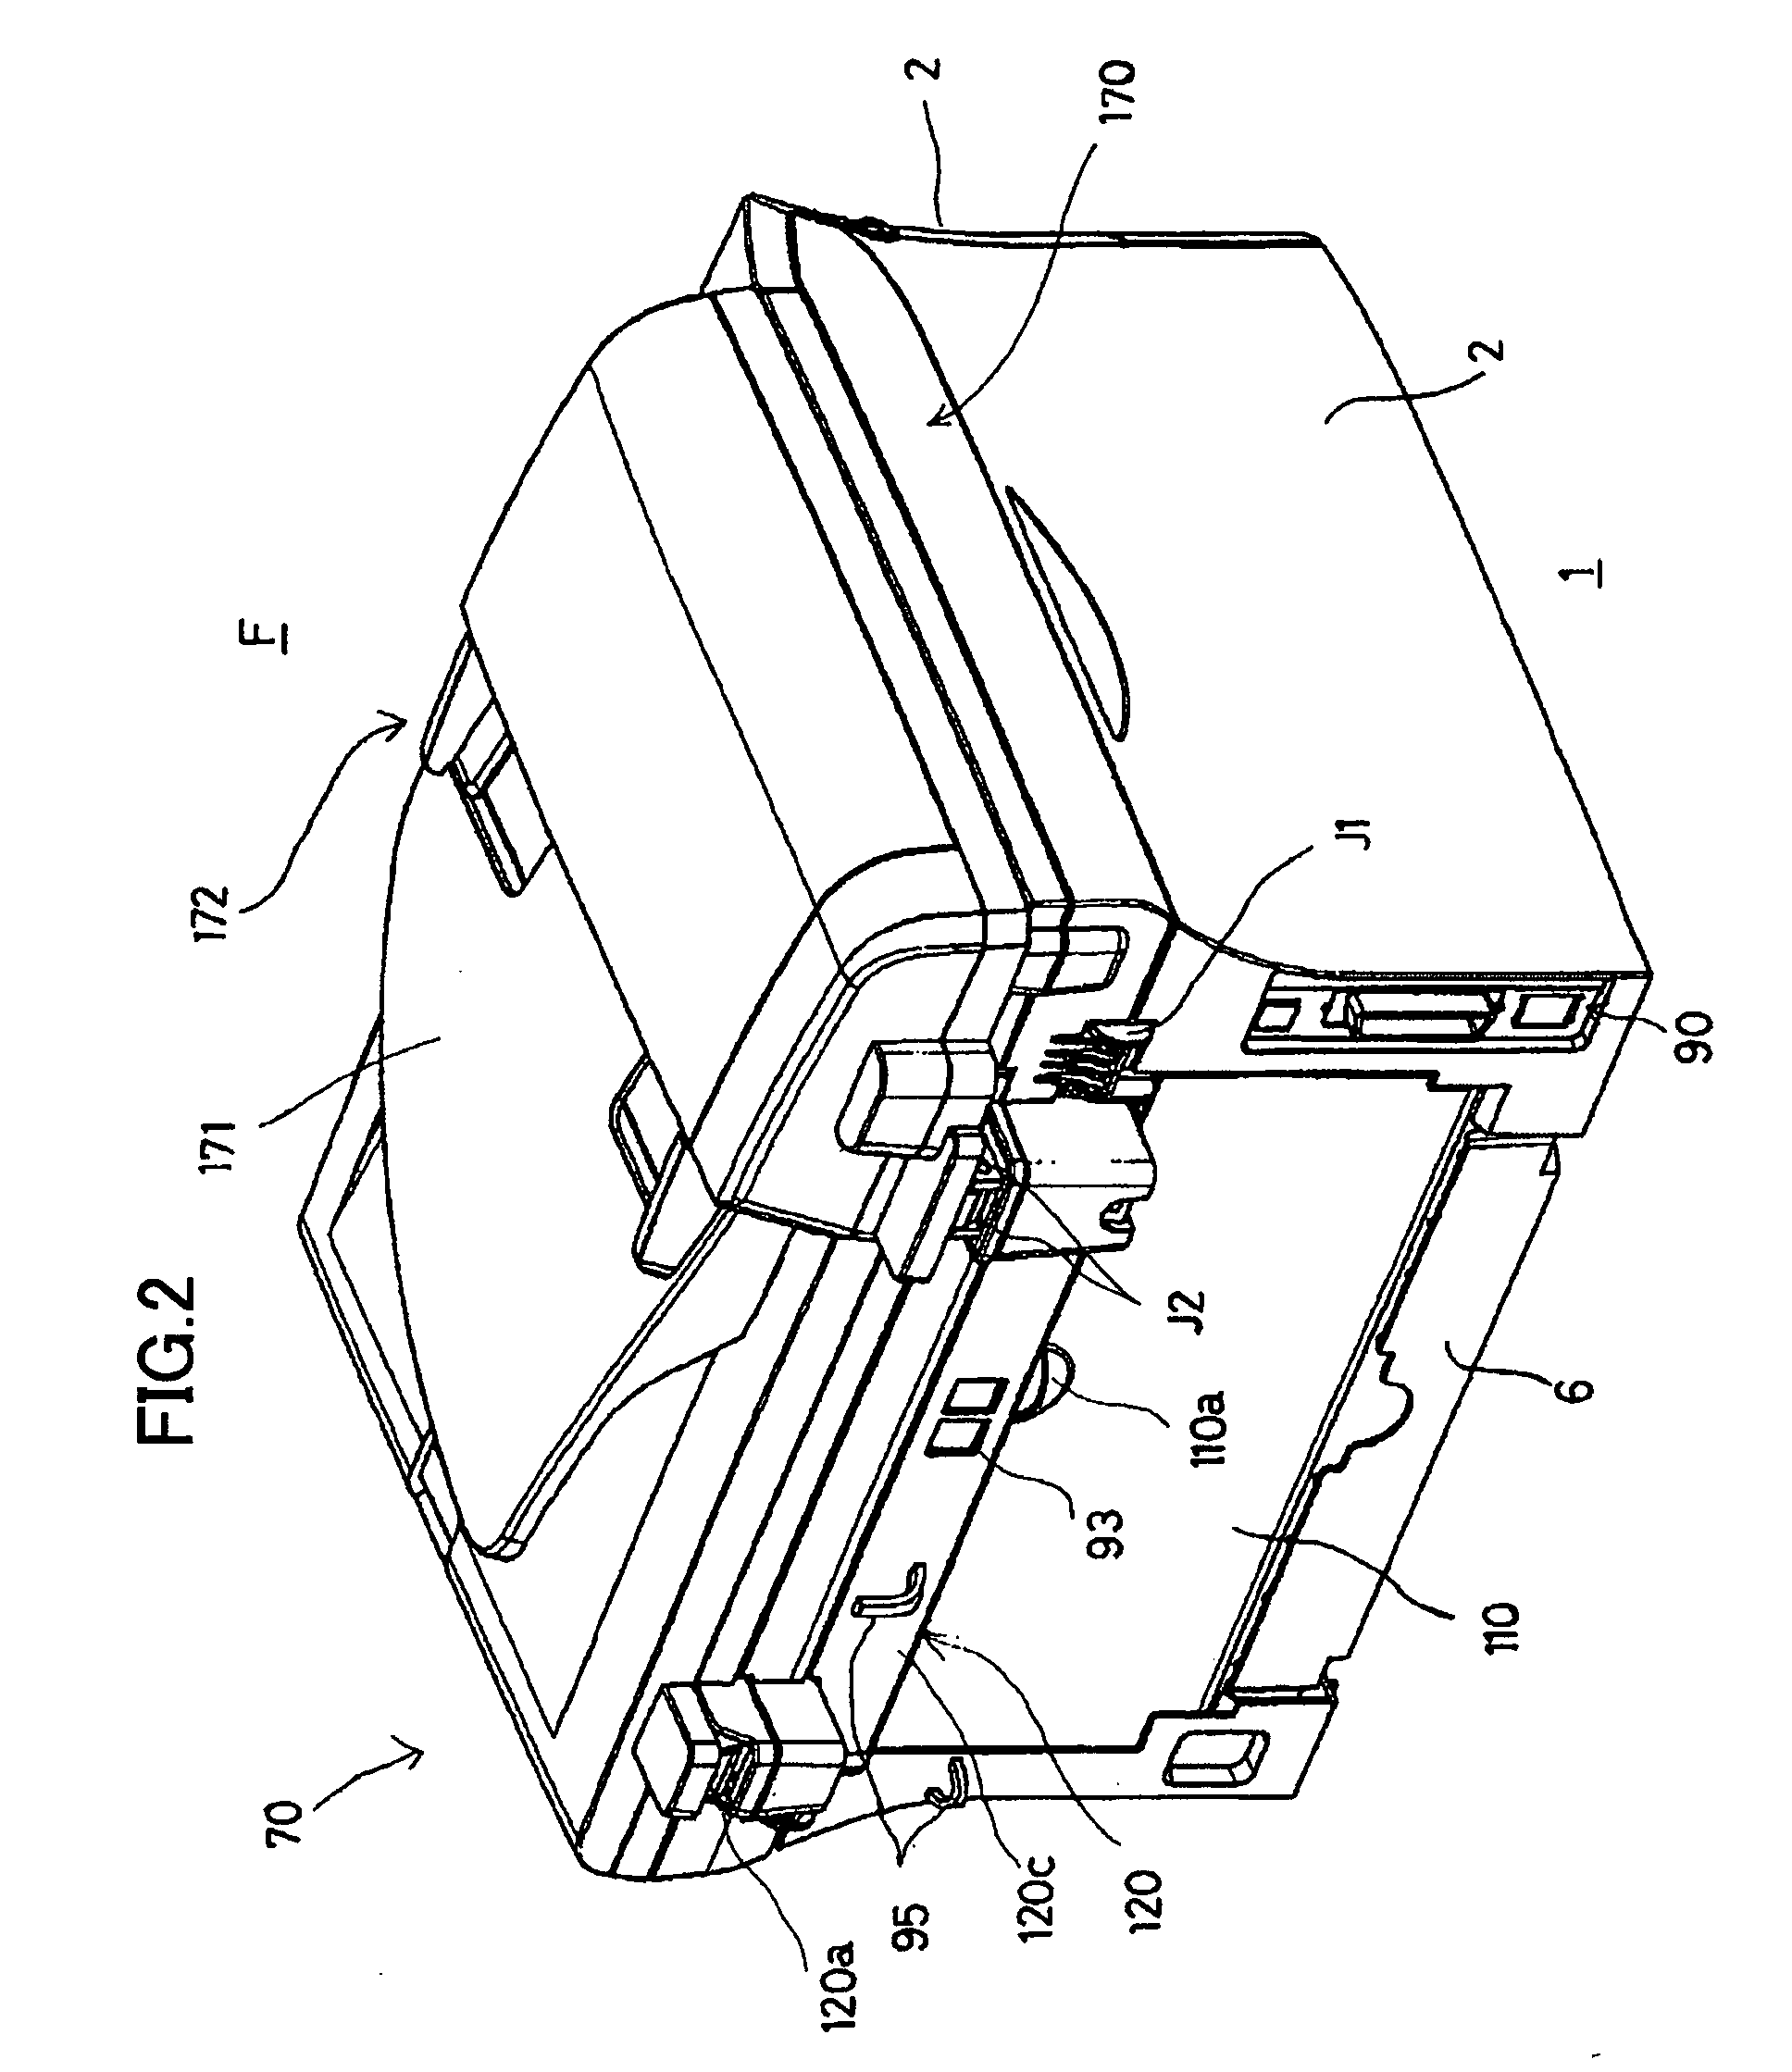 Image-forming device